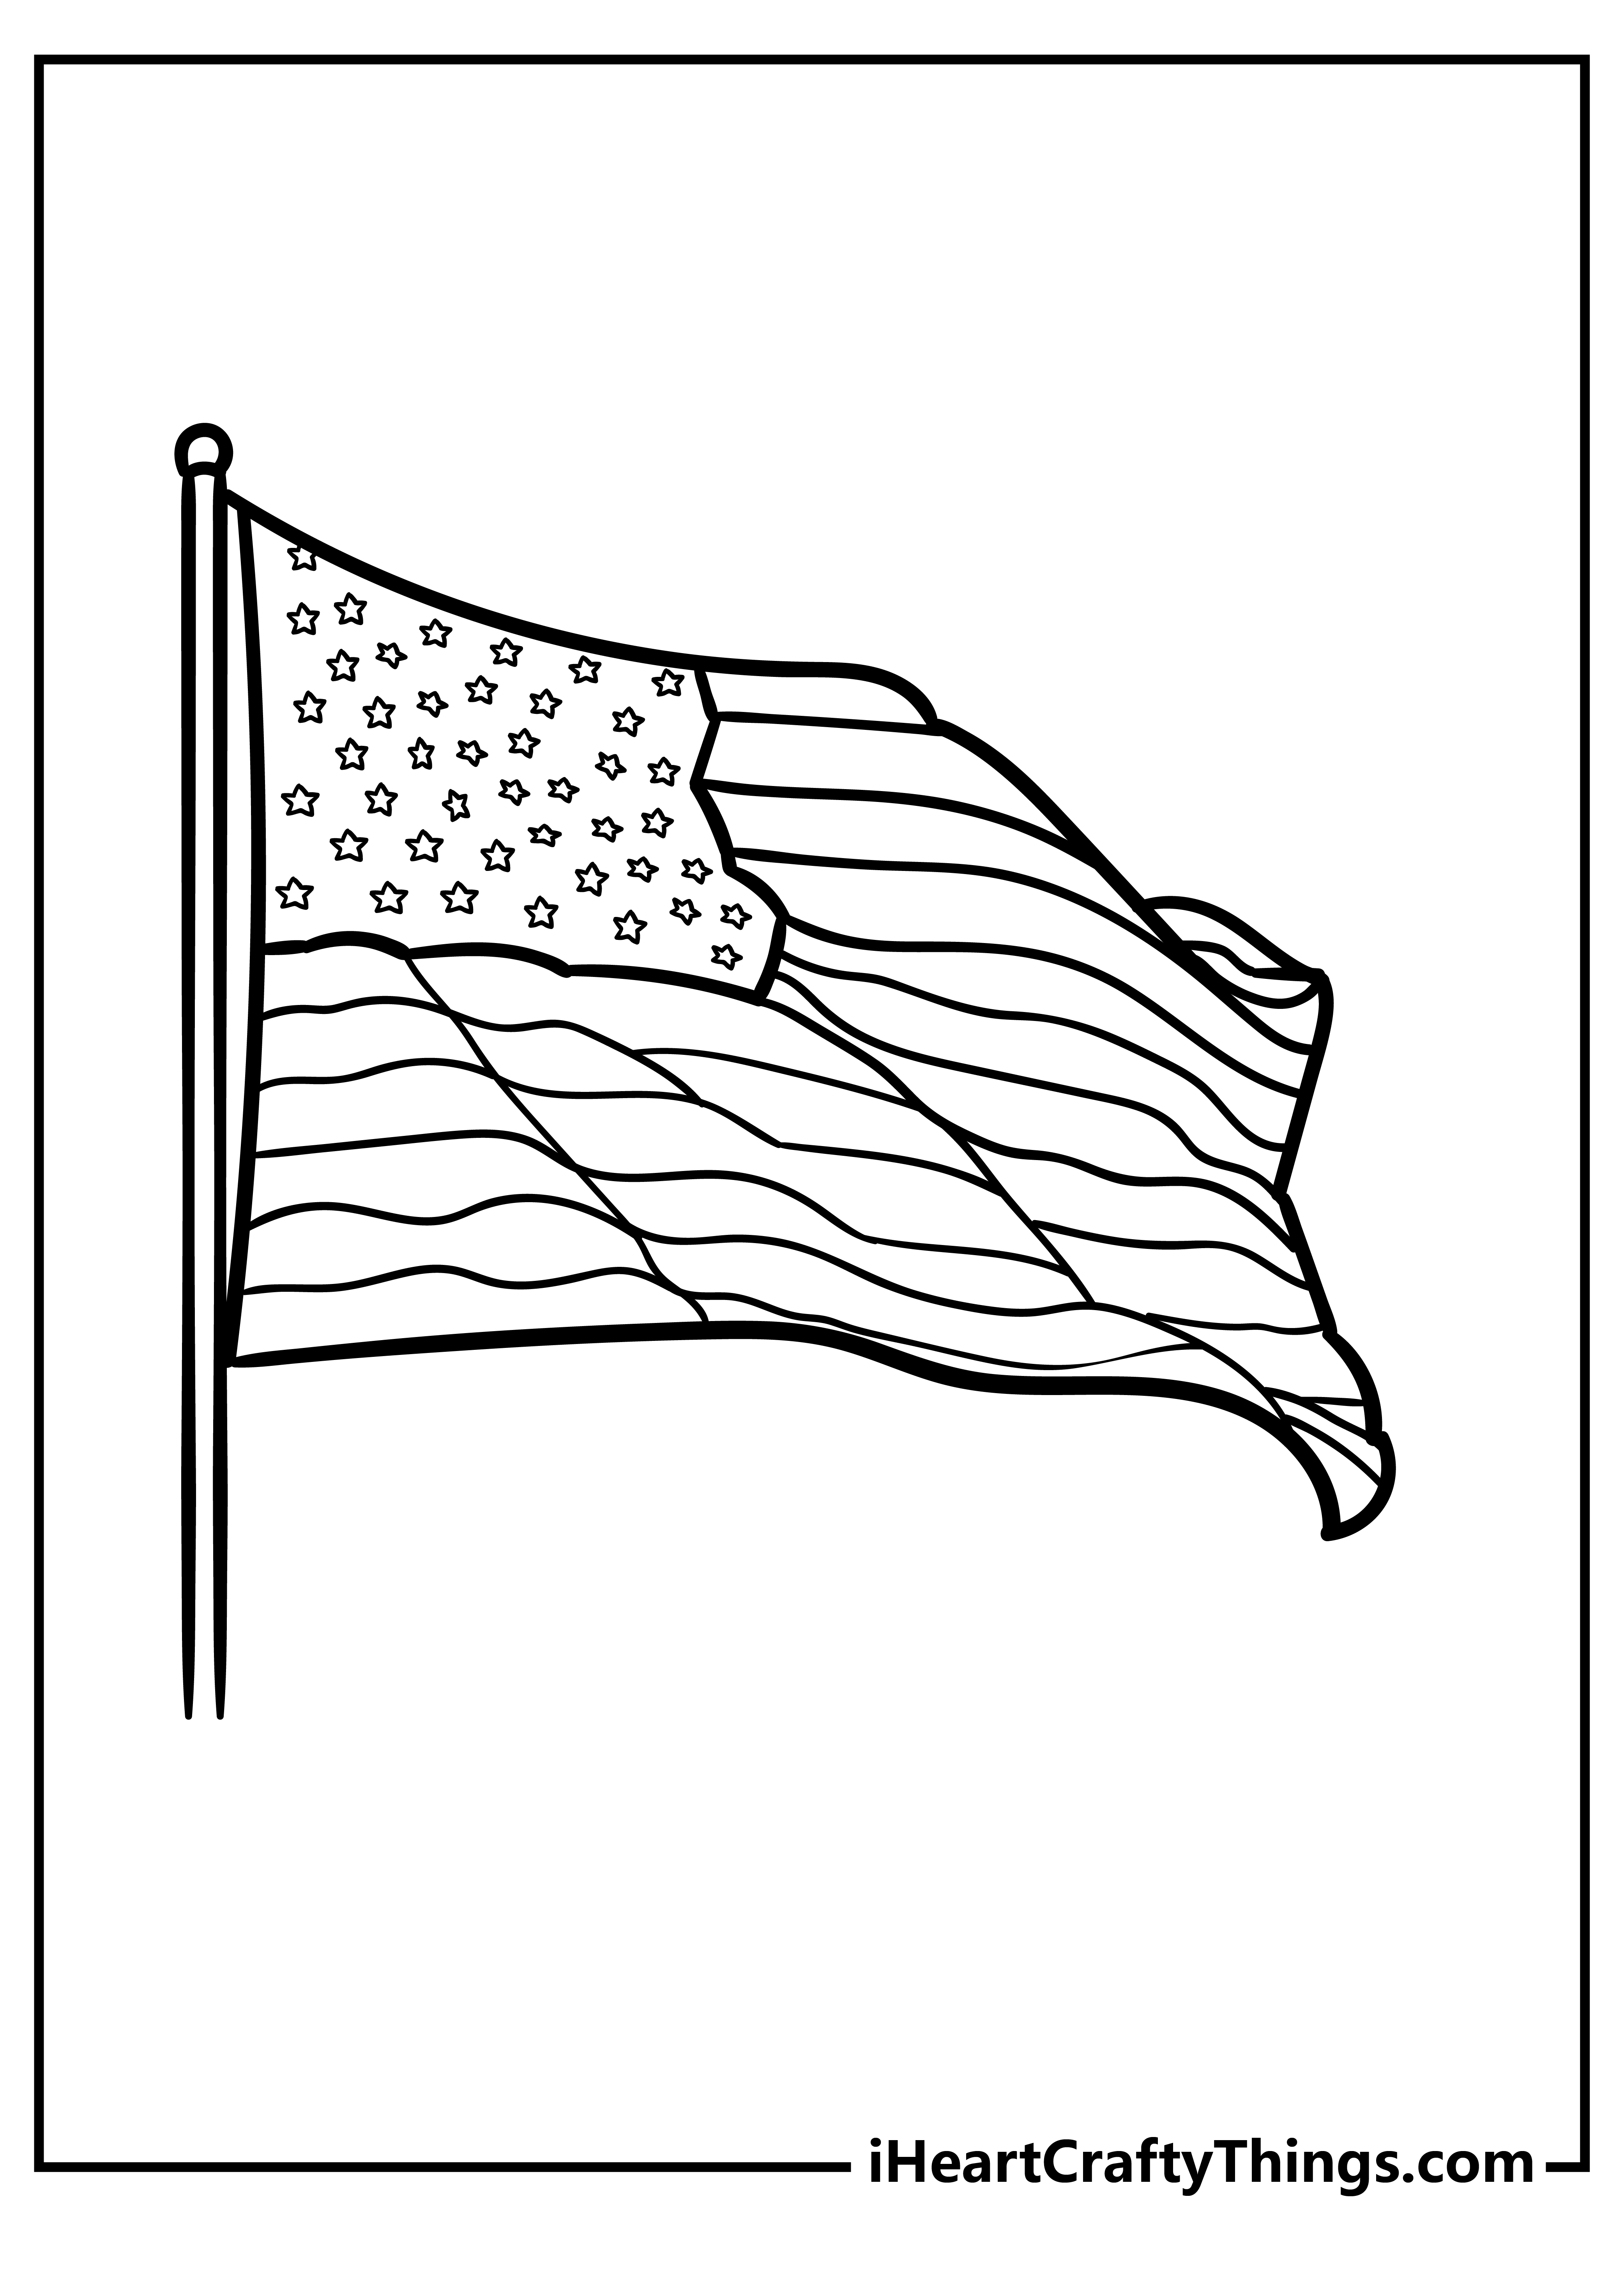 American Flag Coloring Pages for preschoolers free printable